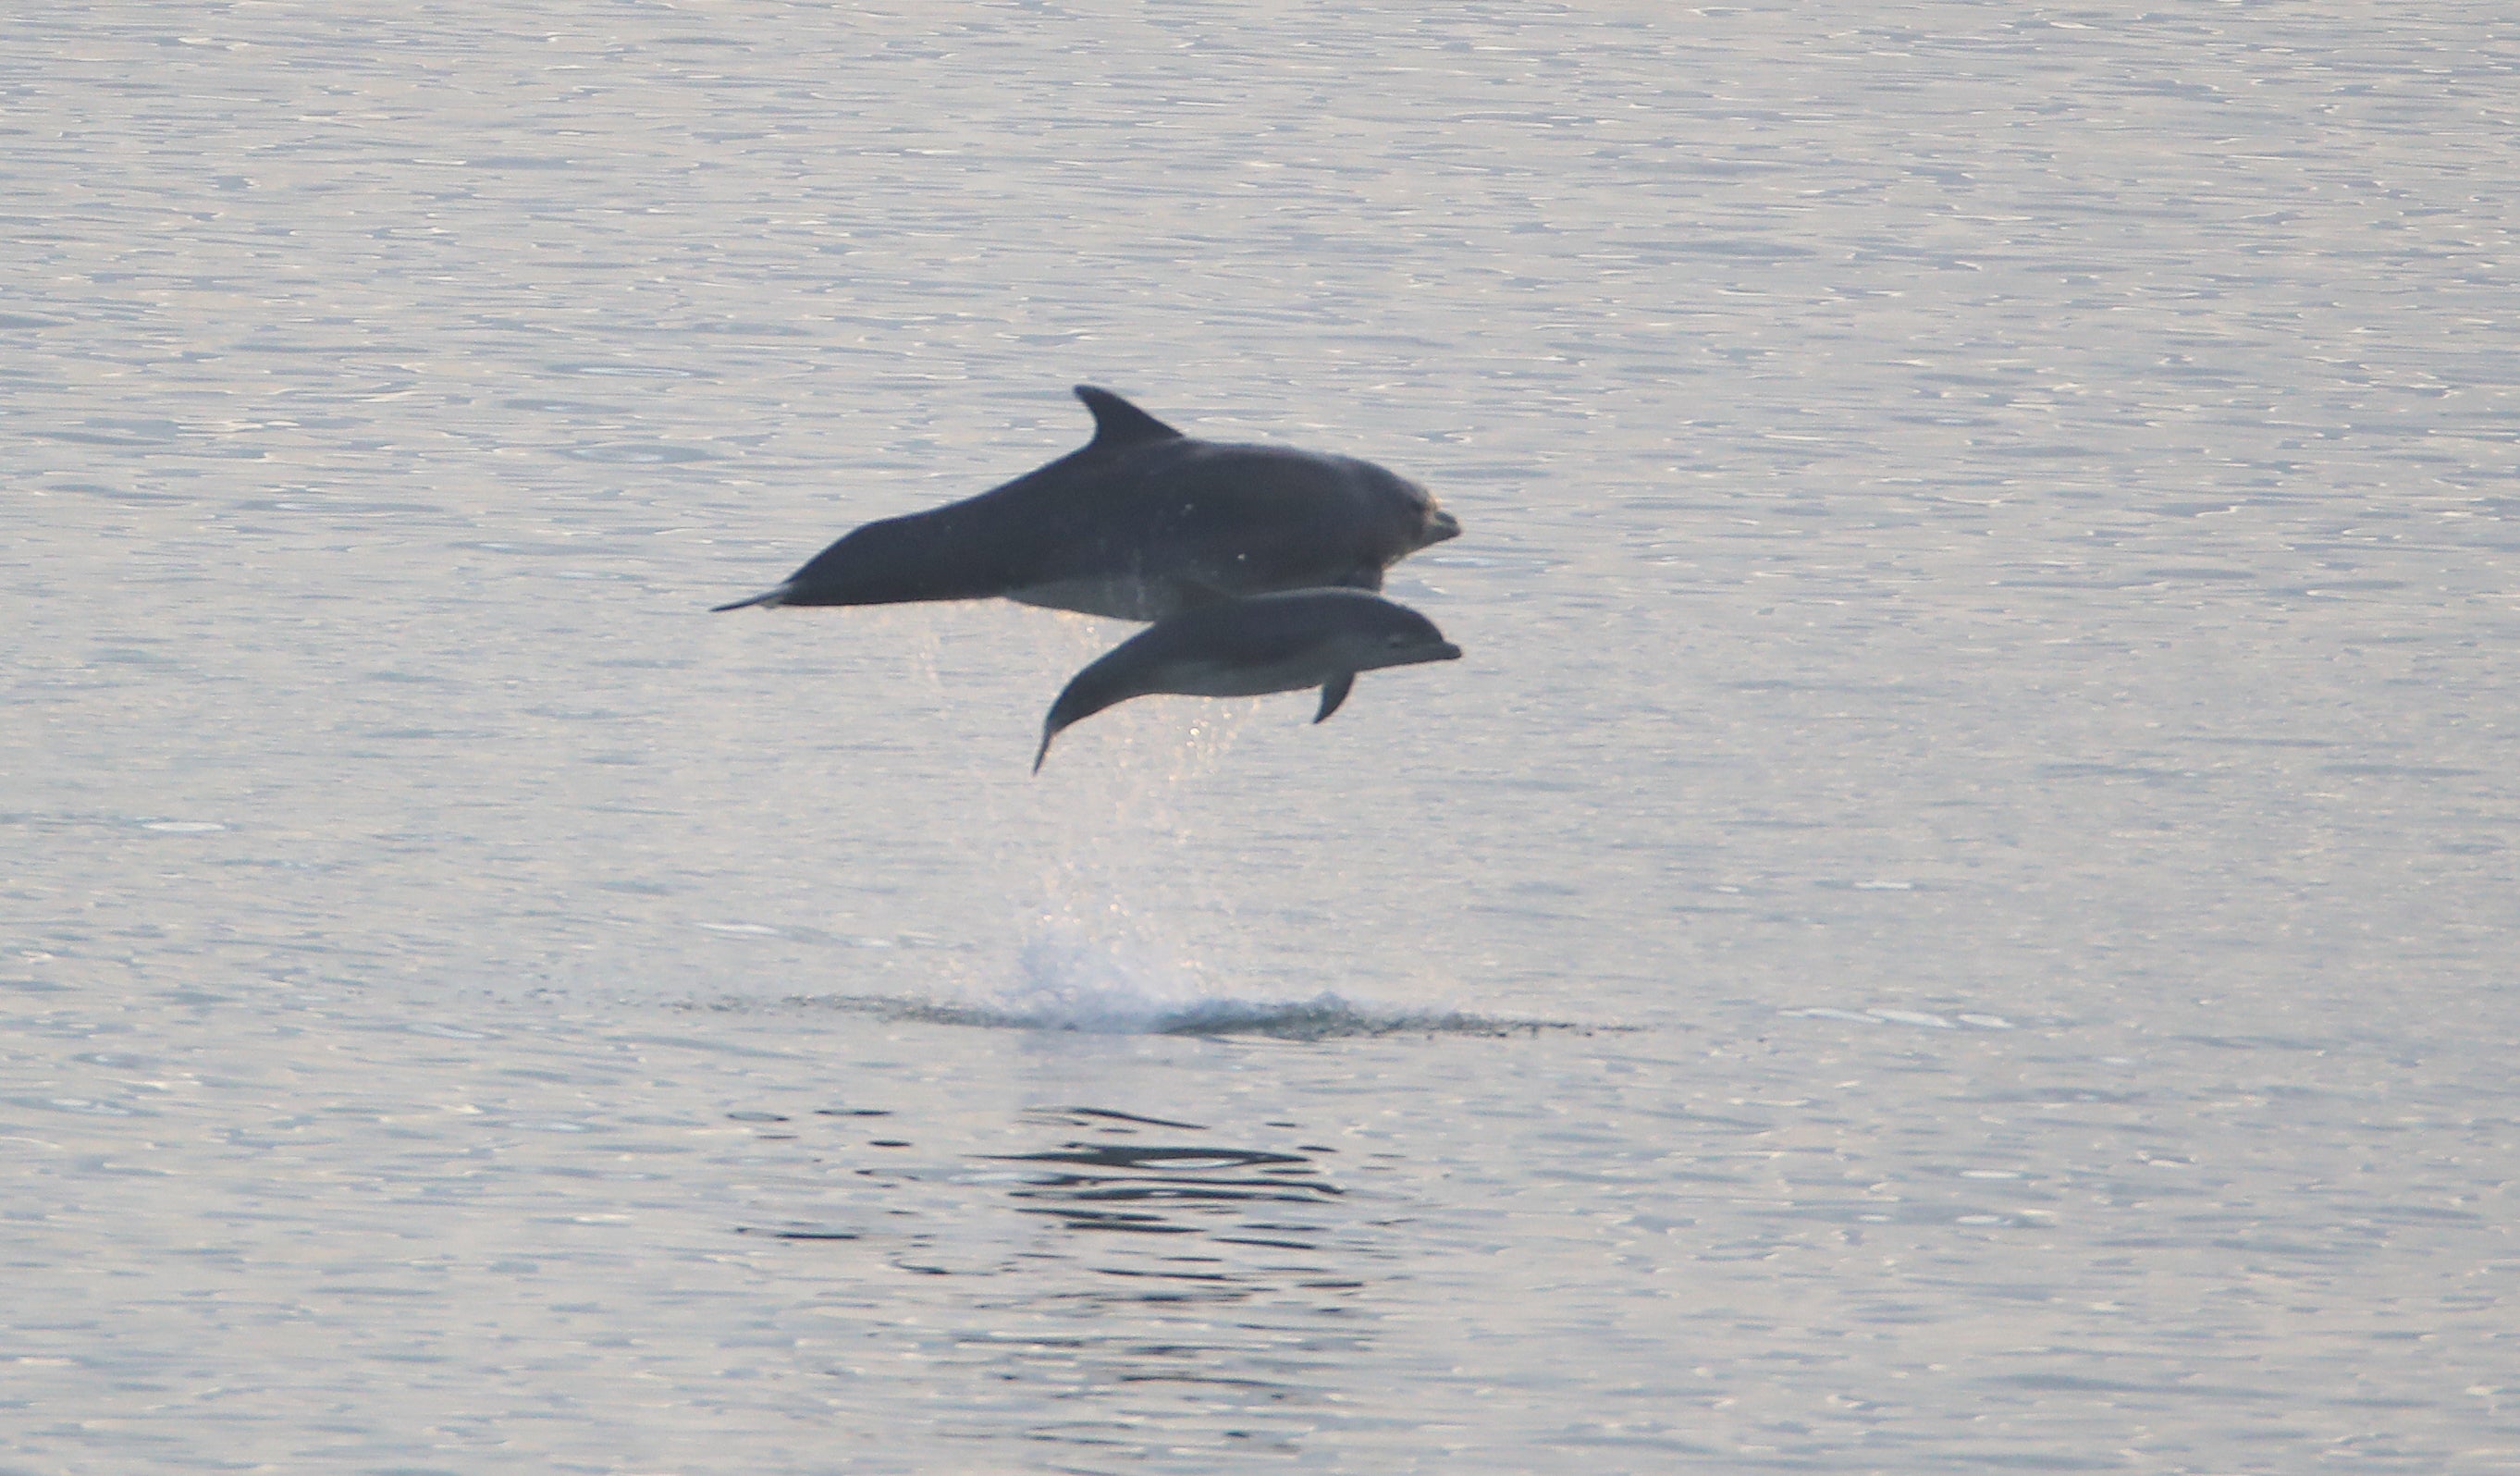 Scientists have found bottlenose dolphins in Wales communicate differently compared to other parts of the world